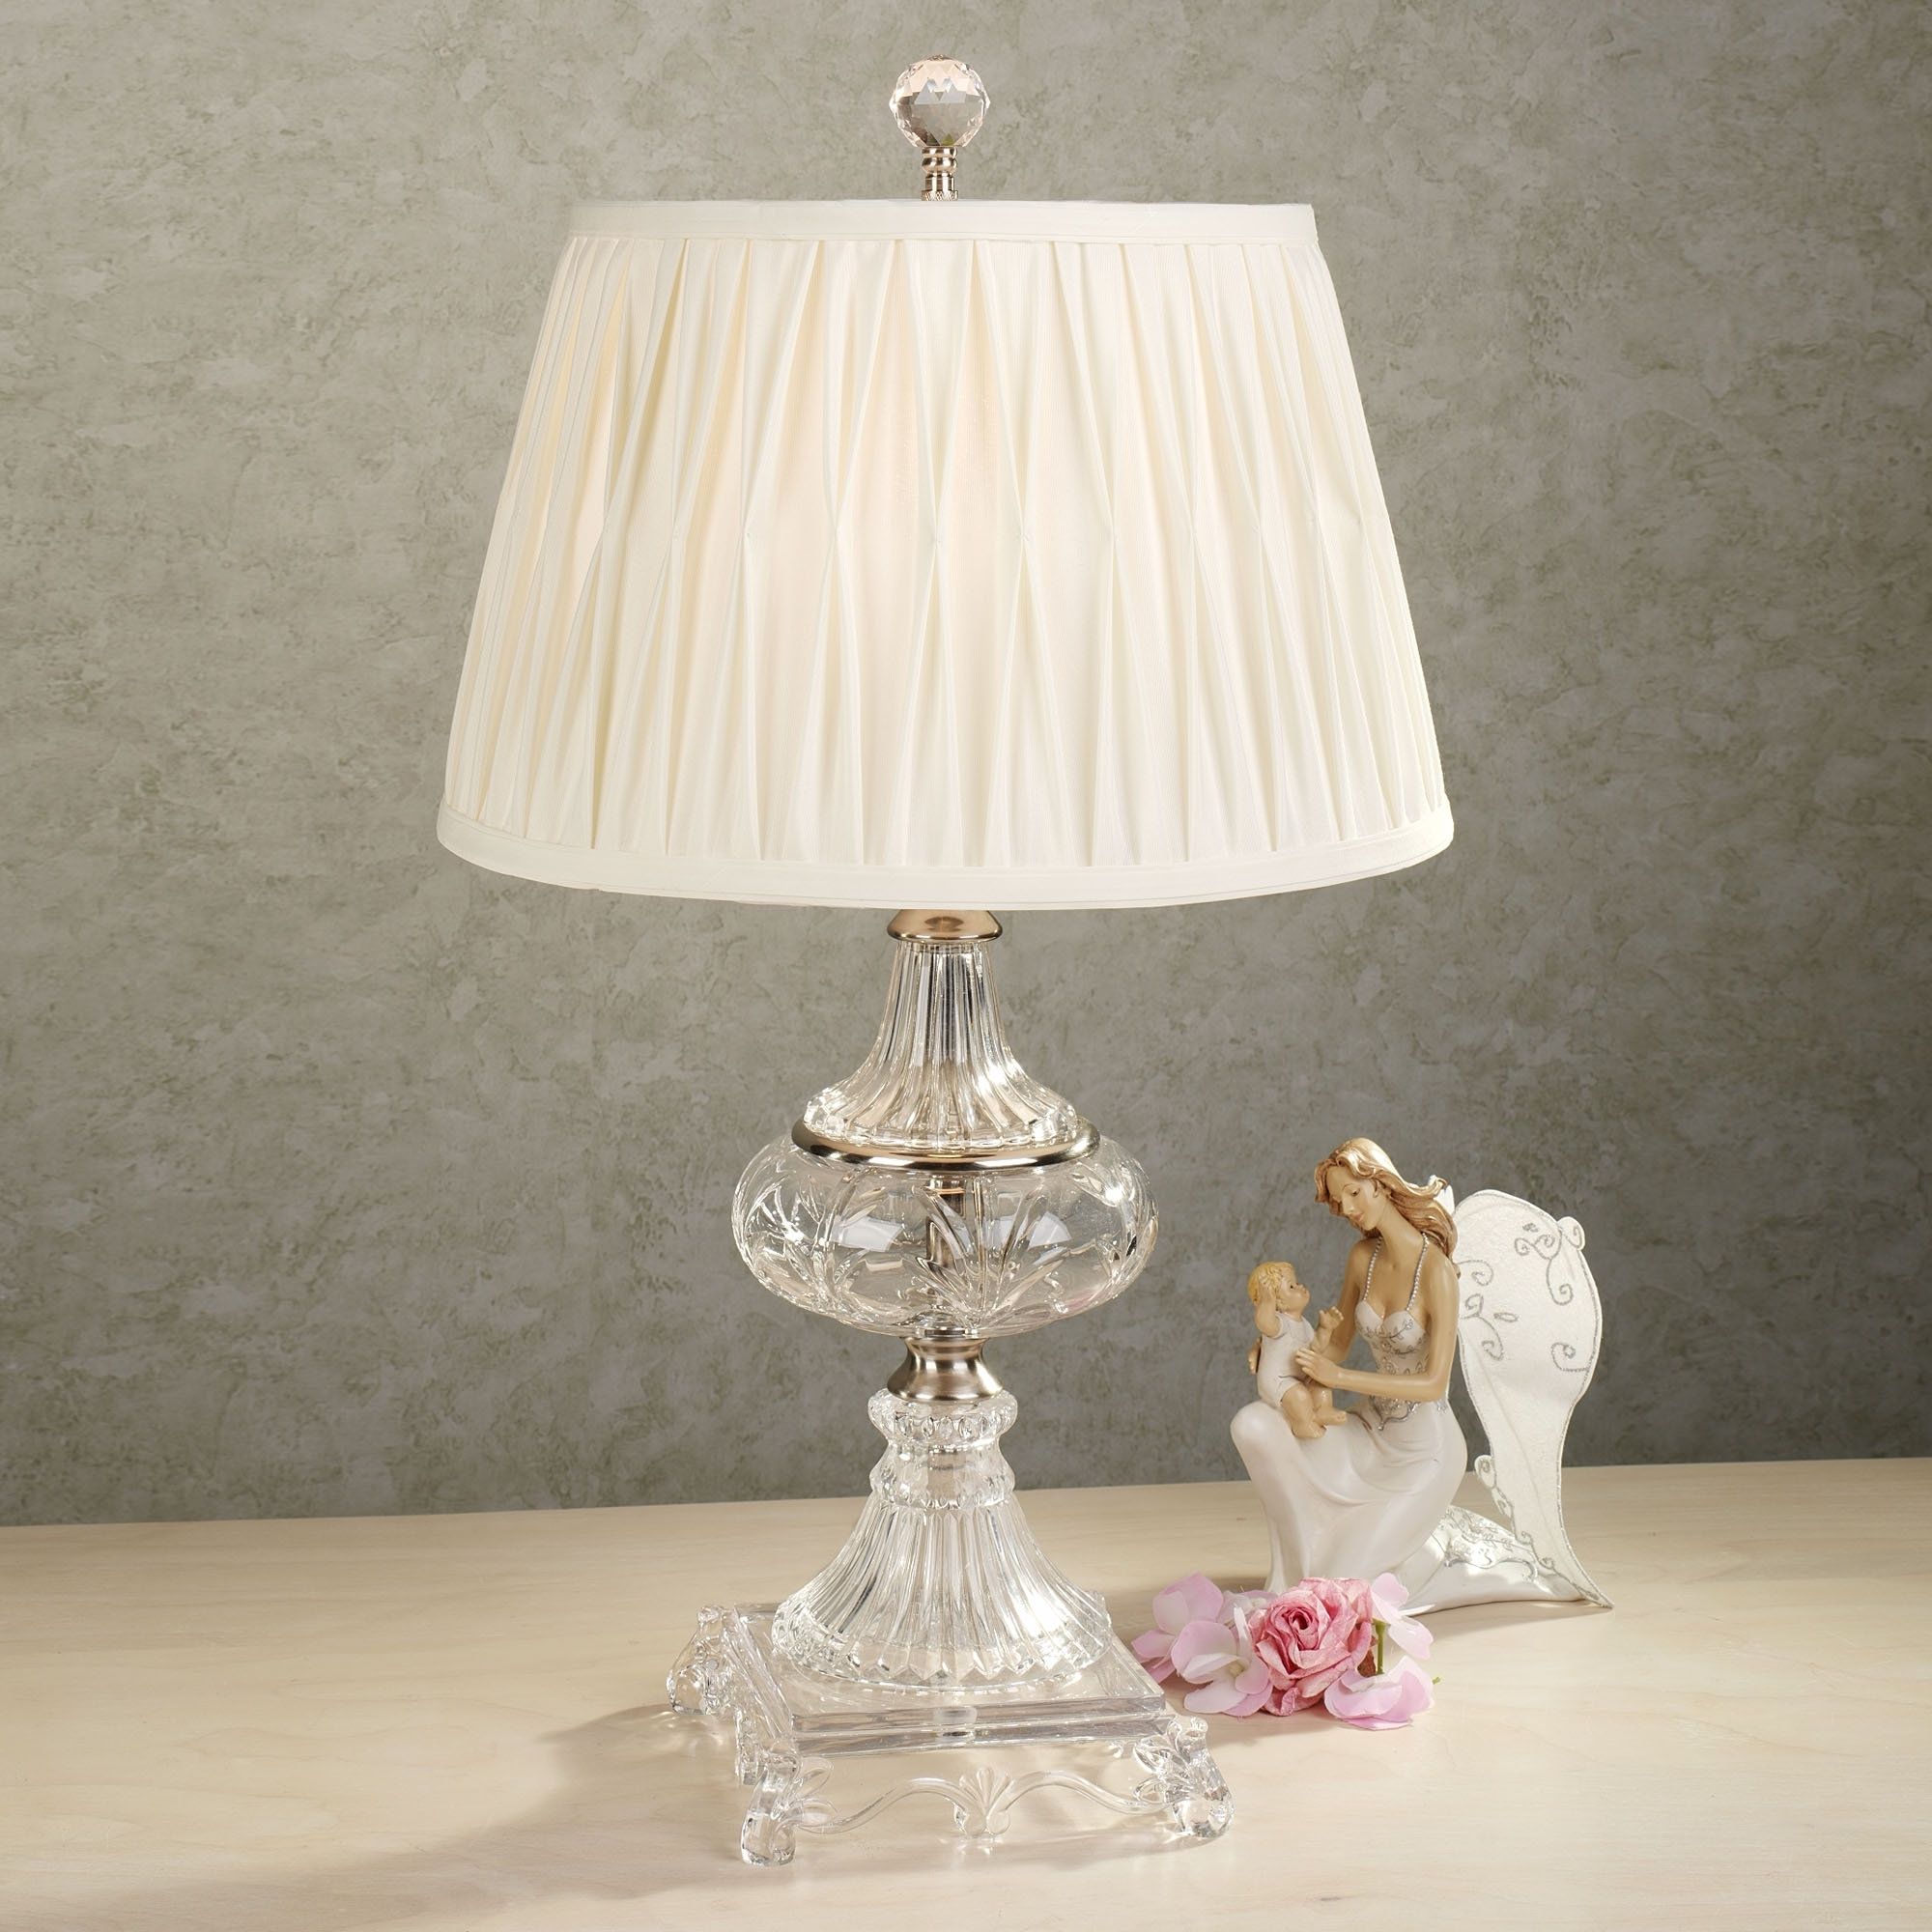 Unique Bedroom Table Lamps For Your Bedroom — The New Way Home Decor Pertaining To Crystal Living Room Table Lamps (View 4 of 15)